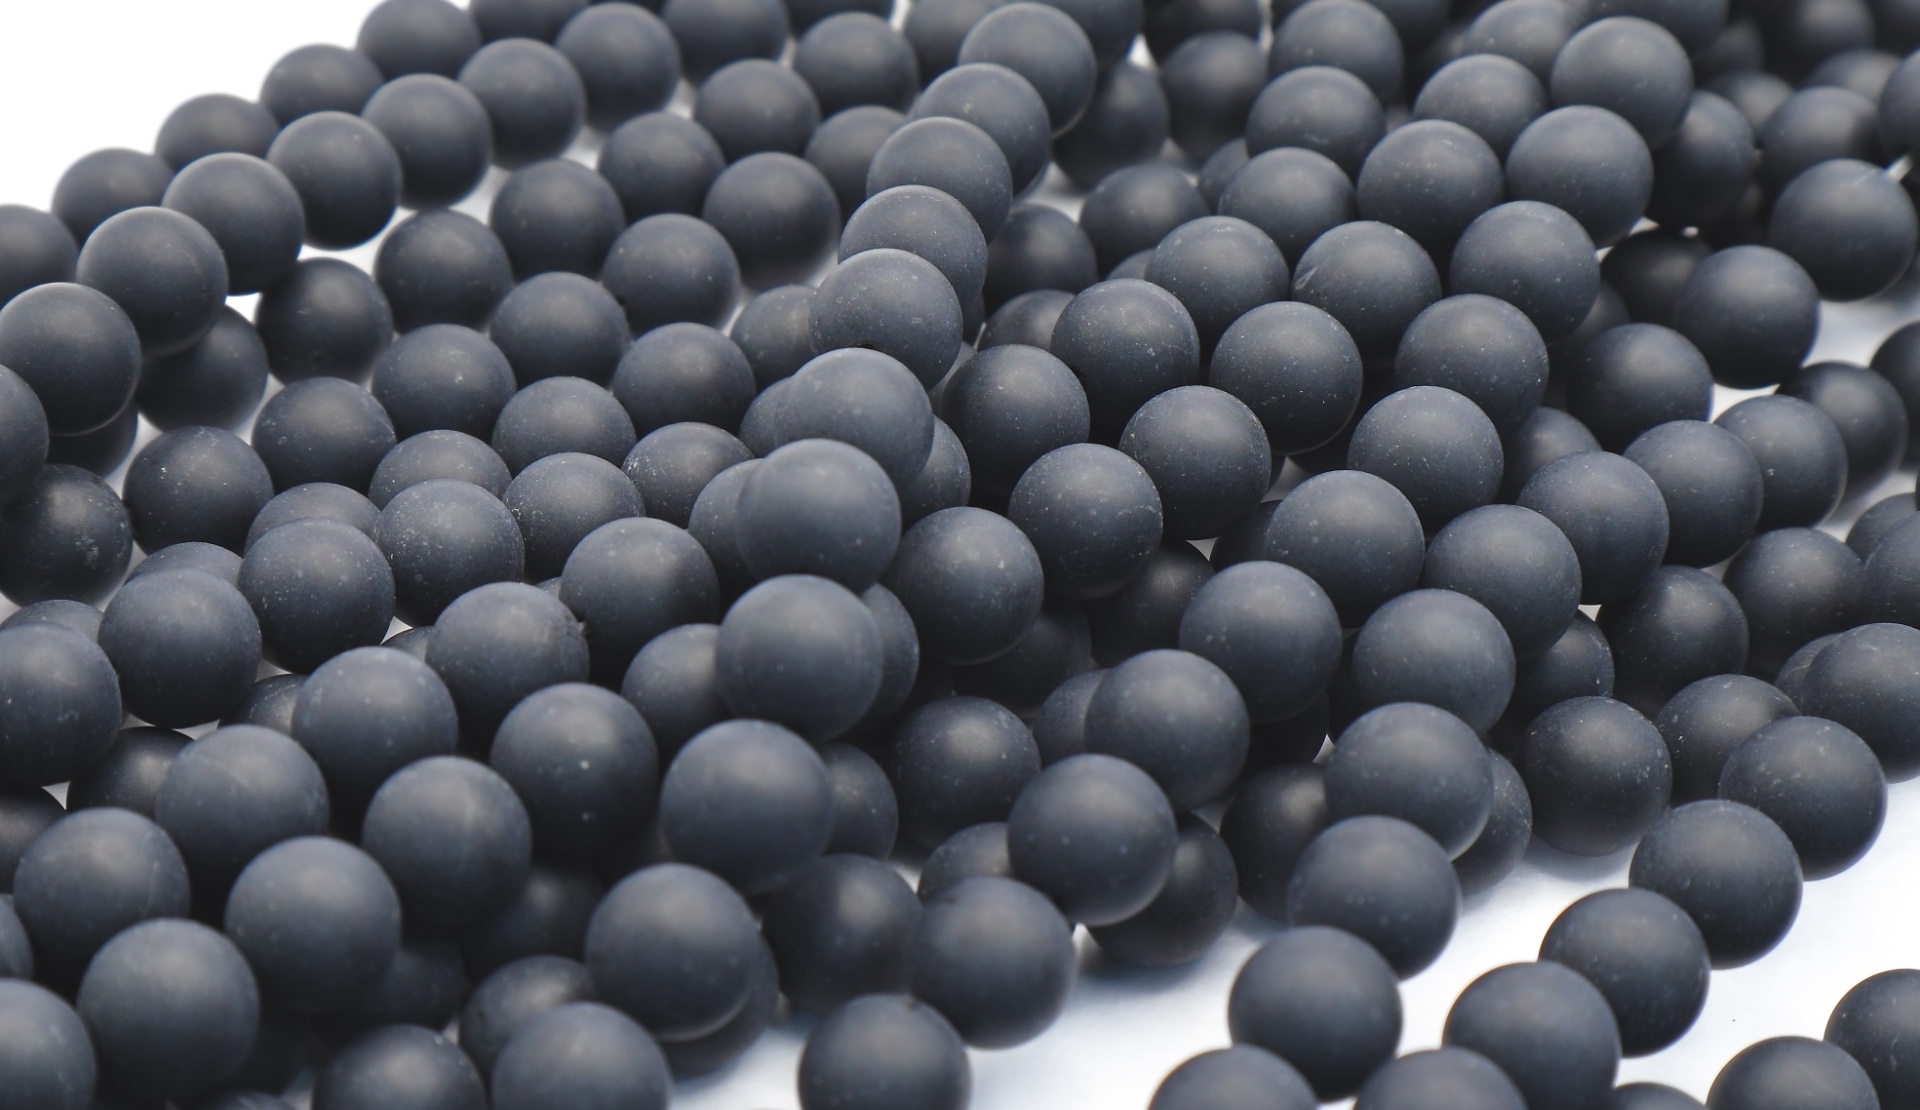 Black Agate Frosted (Matt Finish) Round Beads 4 mm